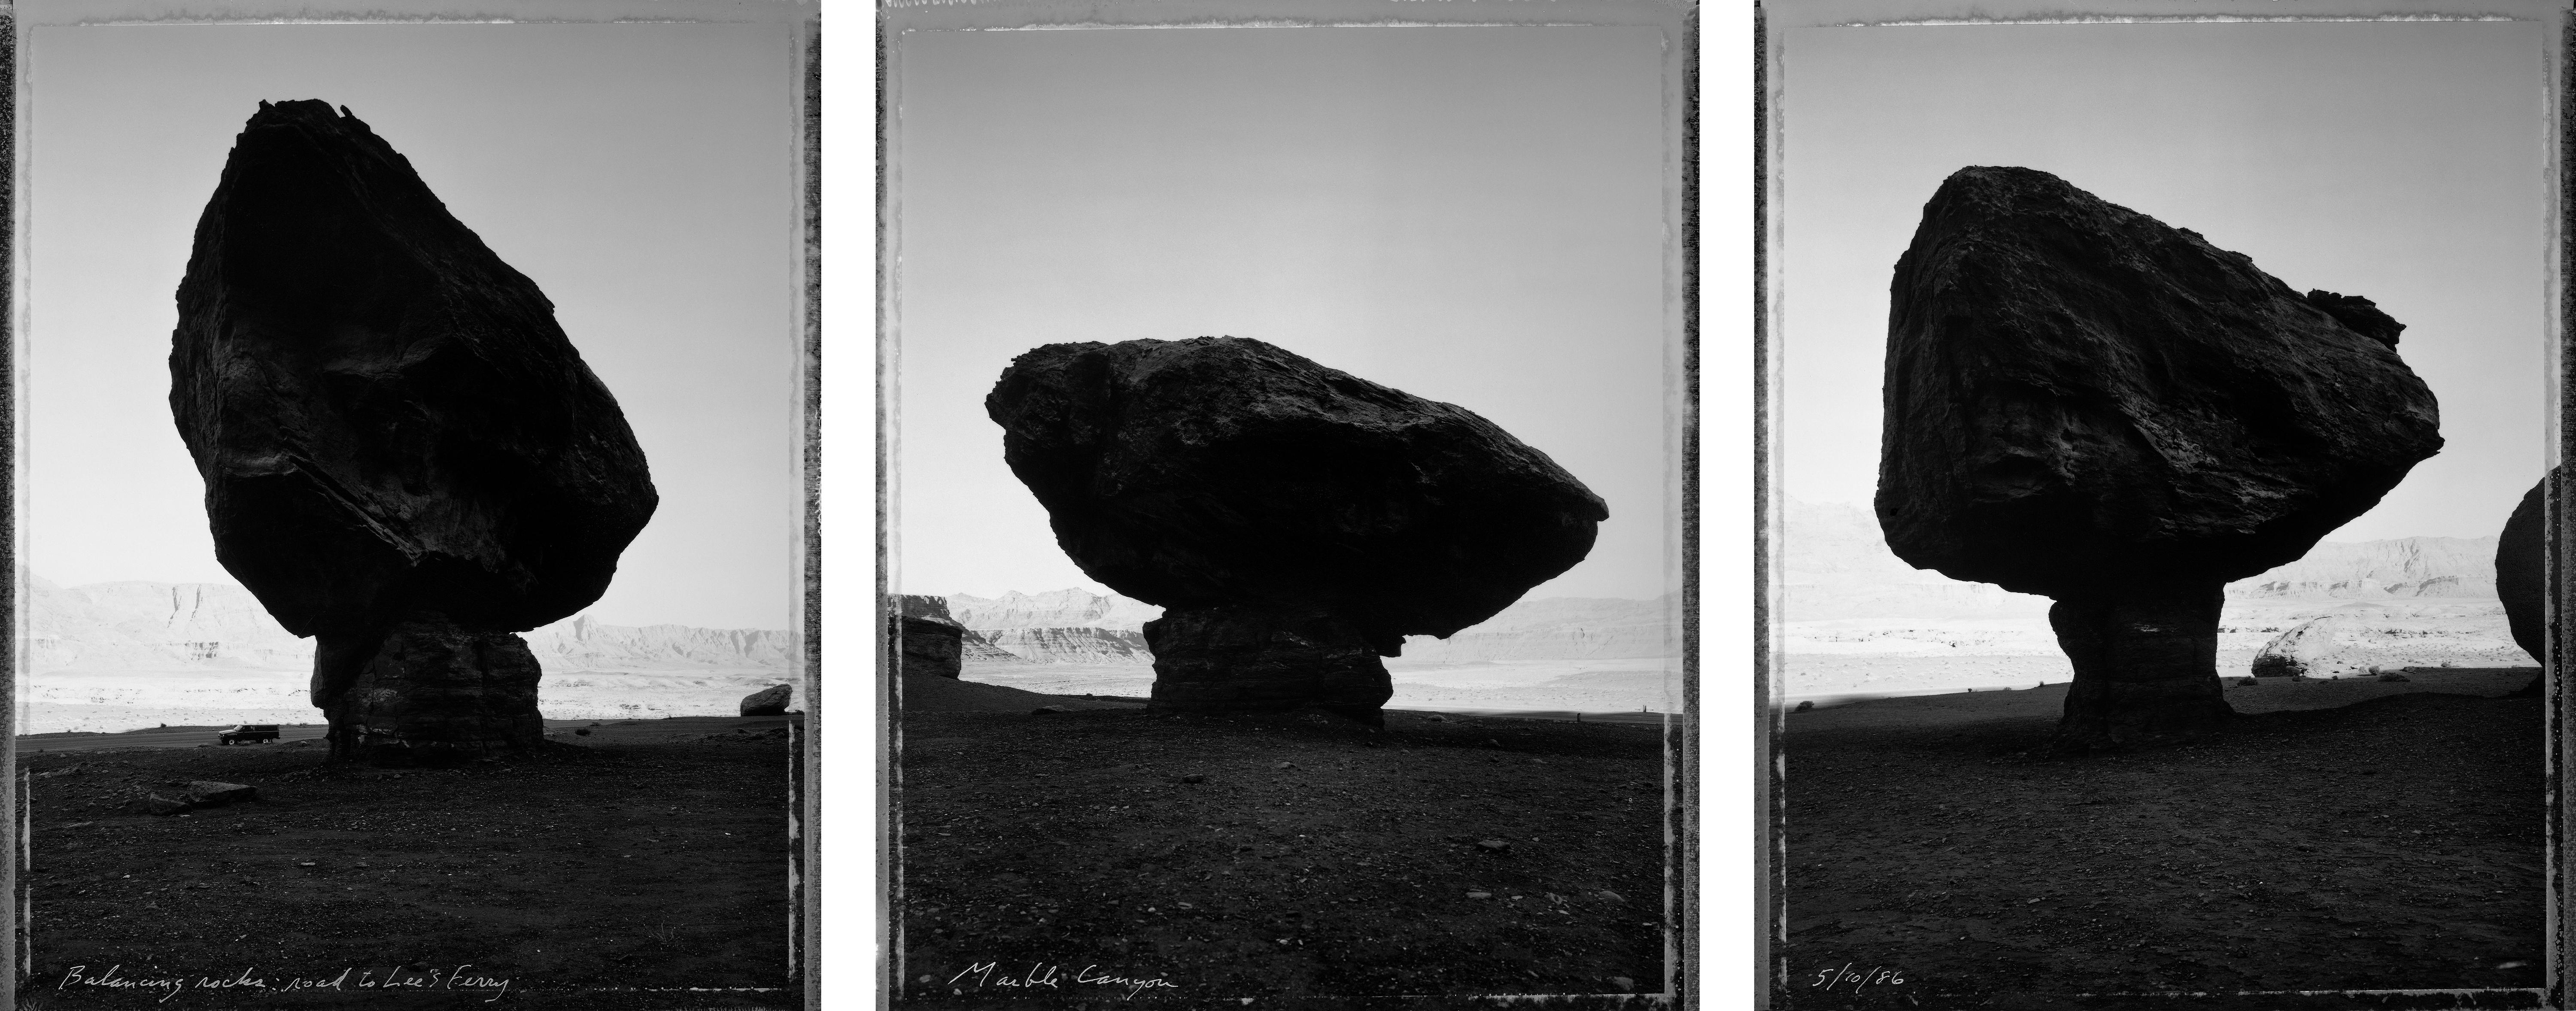 Mark Klett Black and White Photograph - Balancing rocks, road to Lee's Ferry Marble Canyon, AZ, 5/10/86 